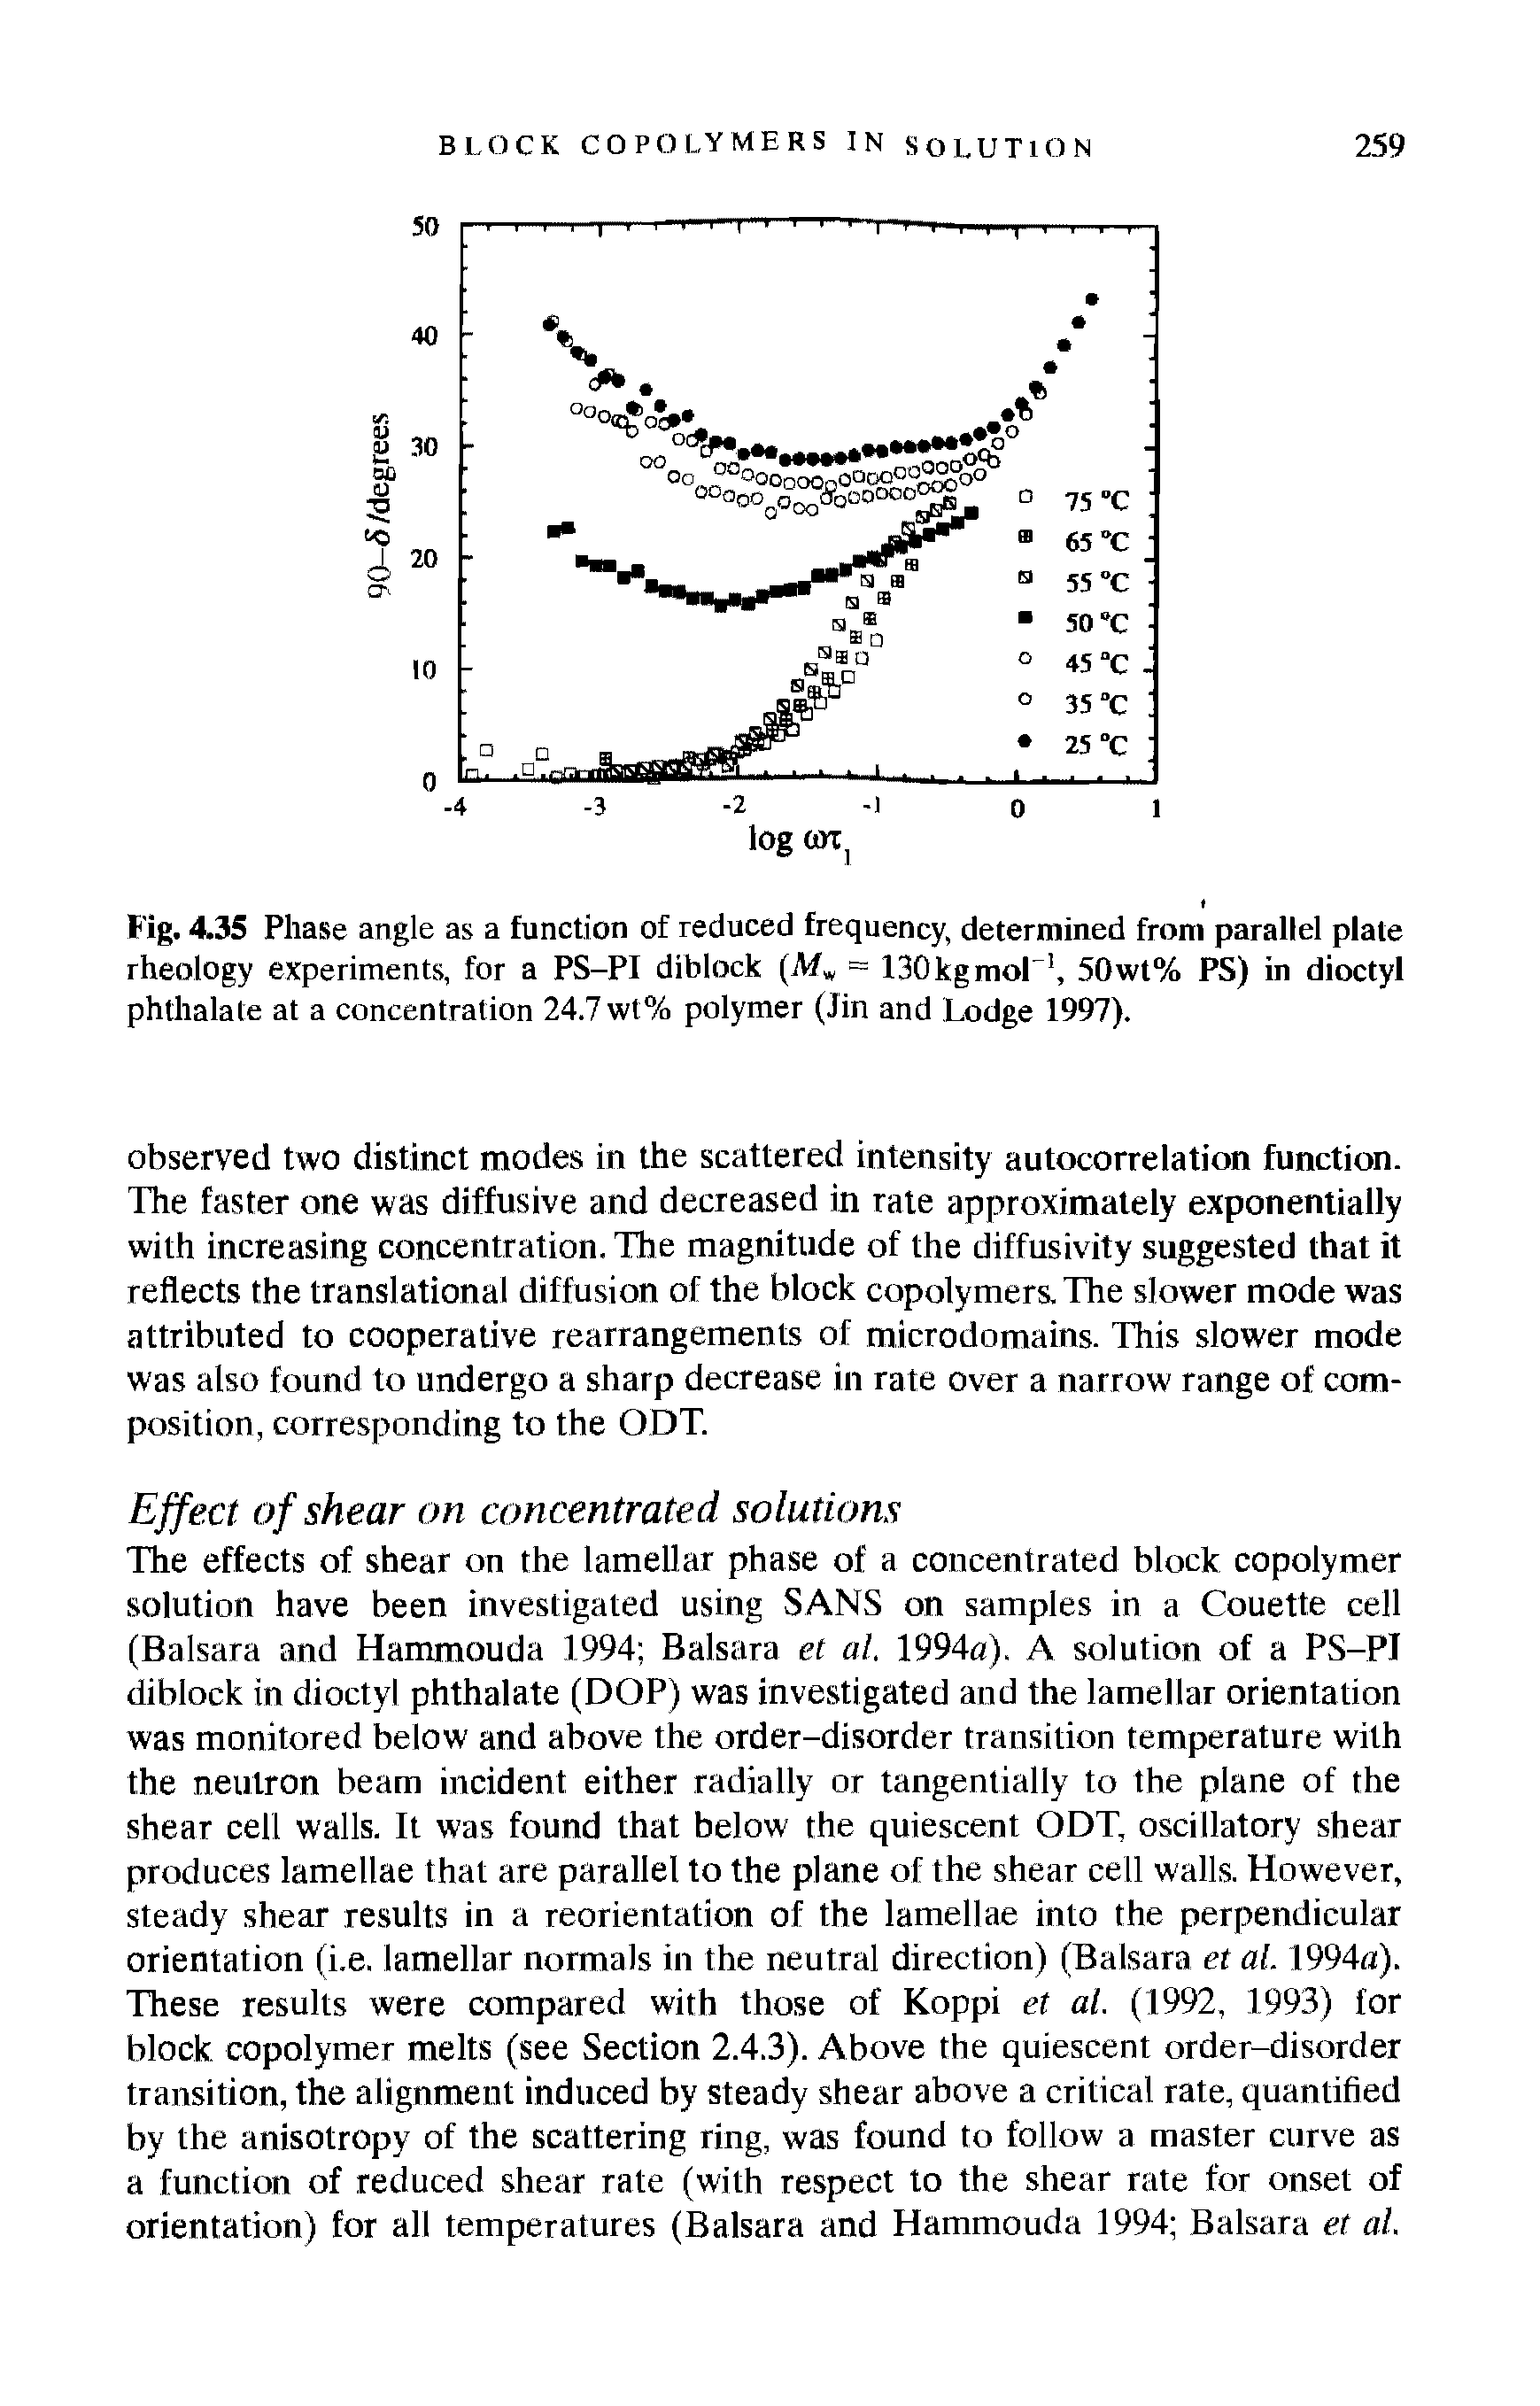 Fig. 4.35 Phase angle as a function of reduced frequency, determined from parallel plate rheology experiments, for a PS-PI diblock (Mv = 130kgmol, 50wt% PS) in dioctyl phthalale at a concentration 24.7 wt% polymer (Jin and Lodge 1997).